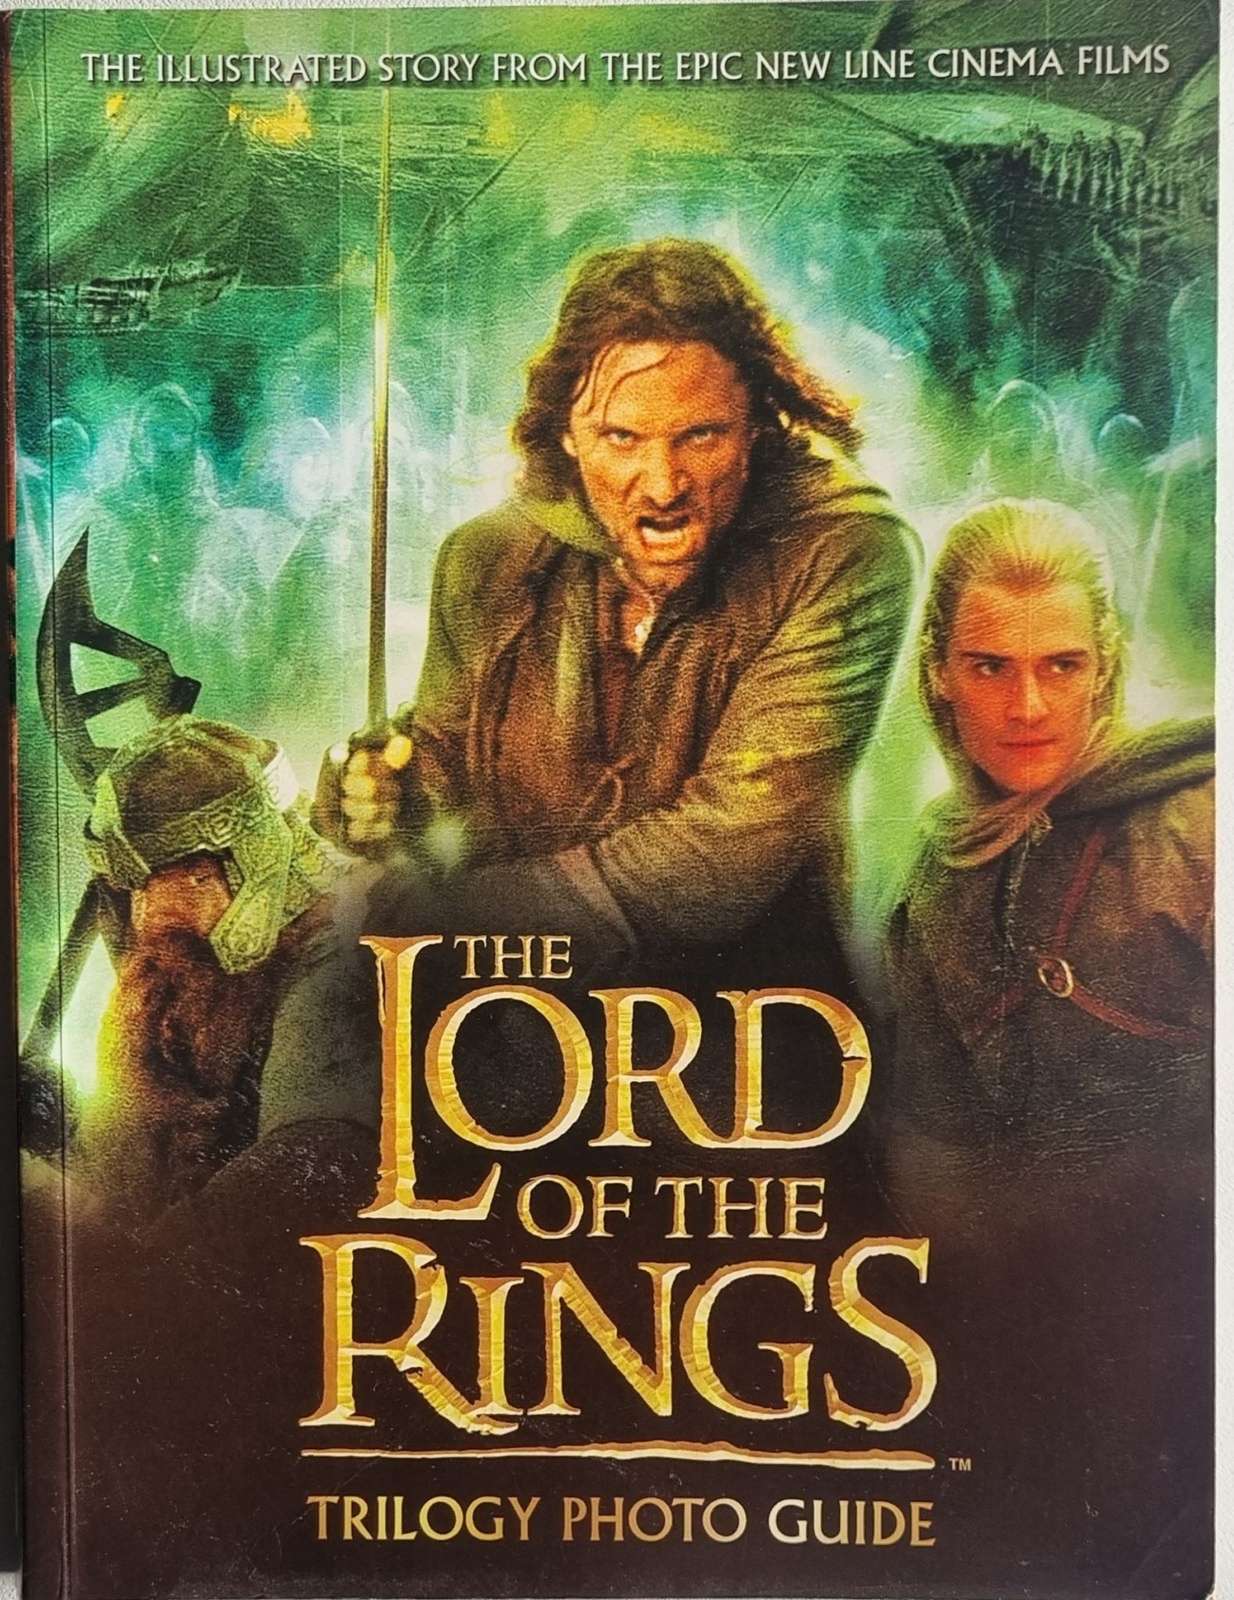 The Lord of the Rings Trilogy Photo Guide